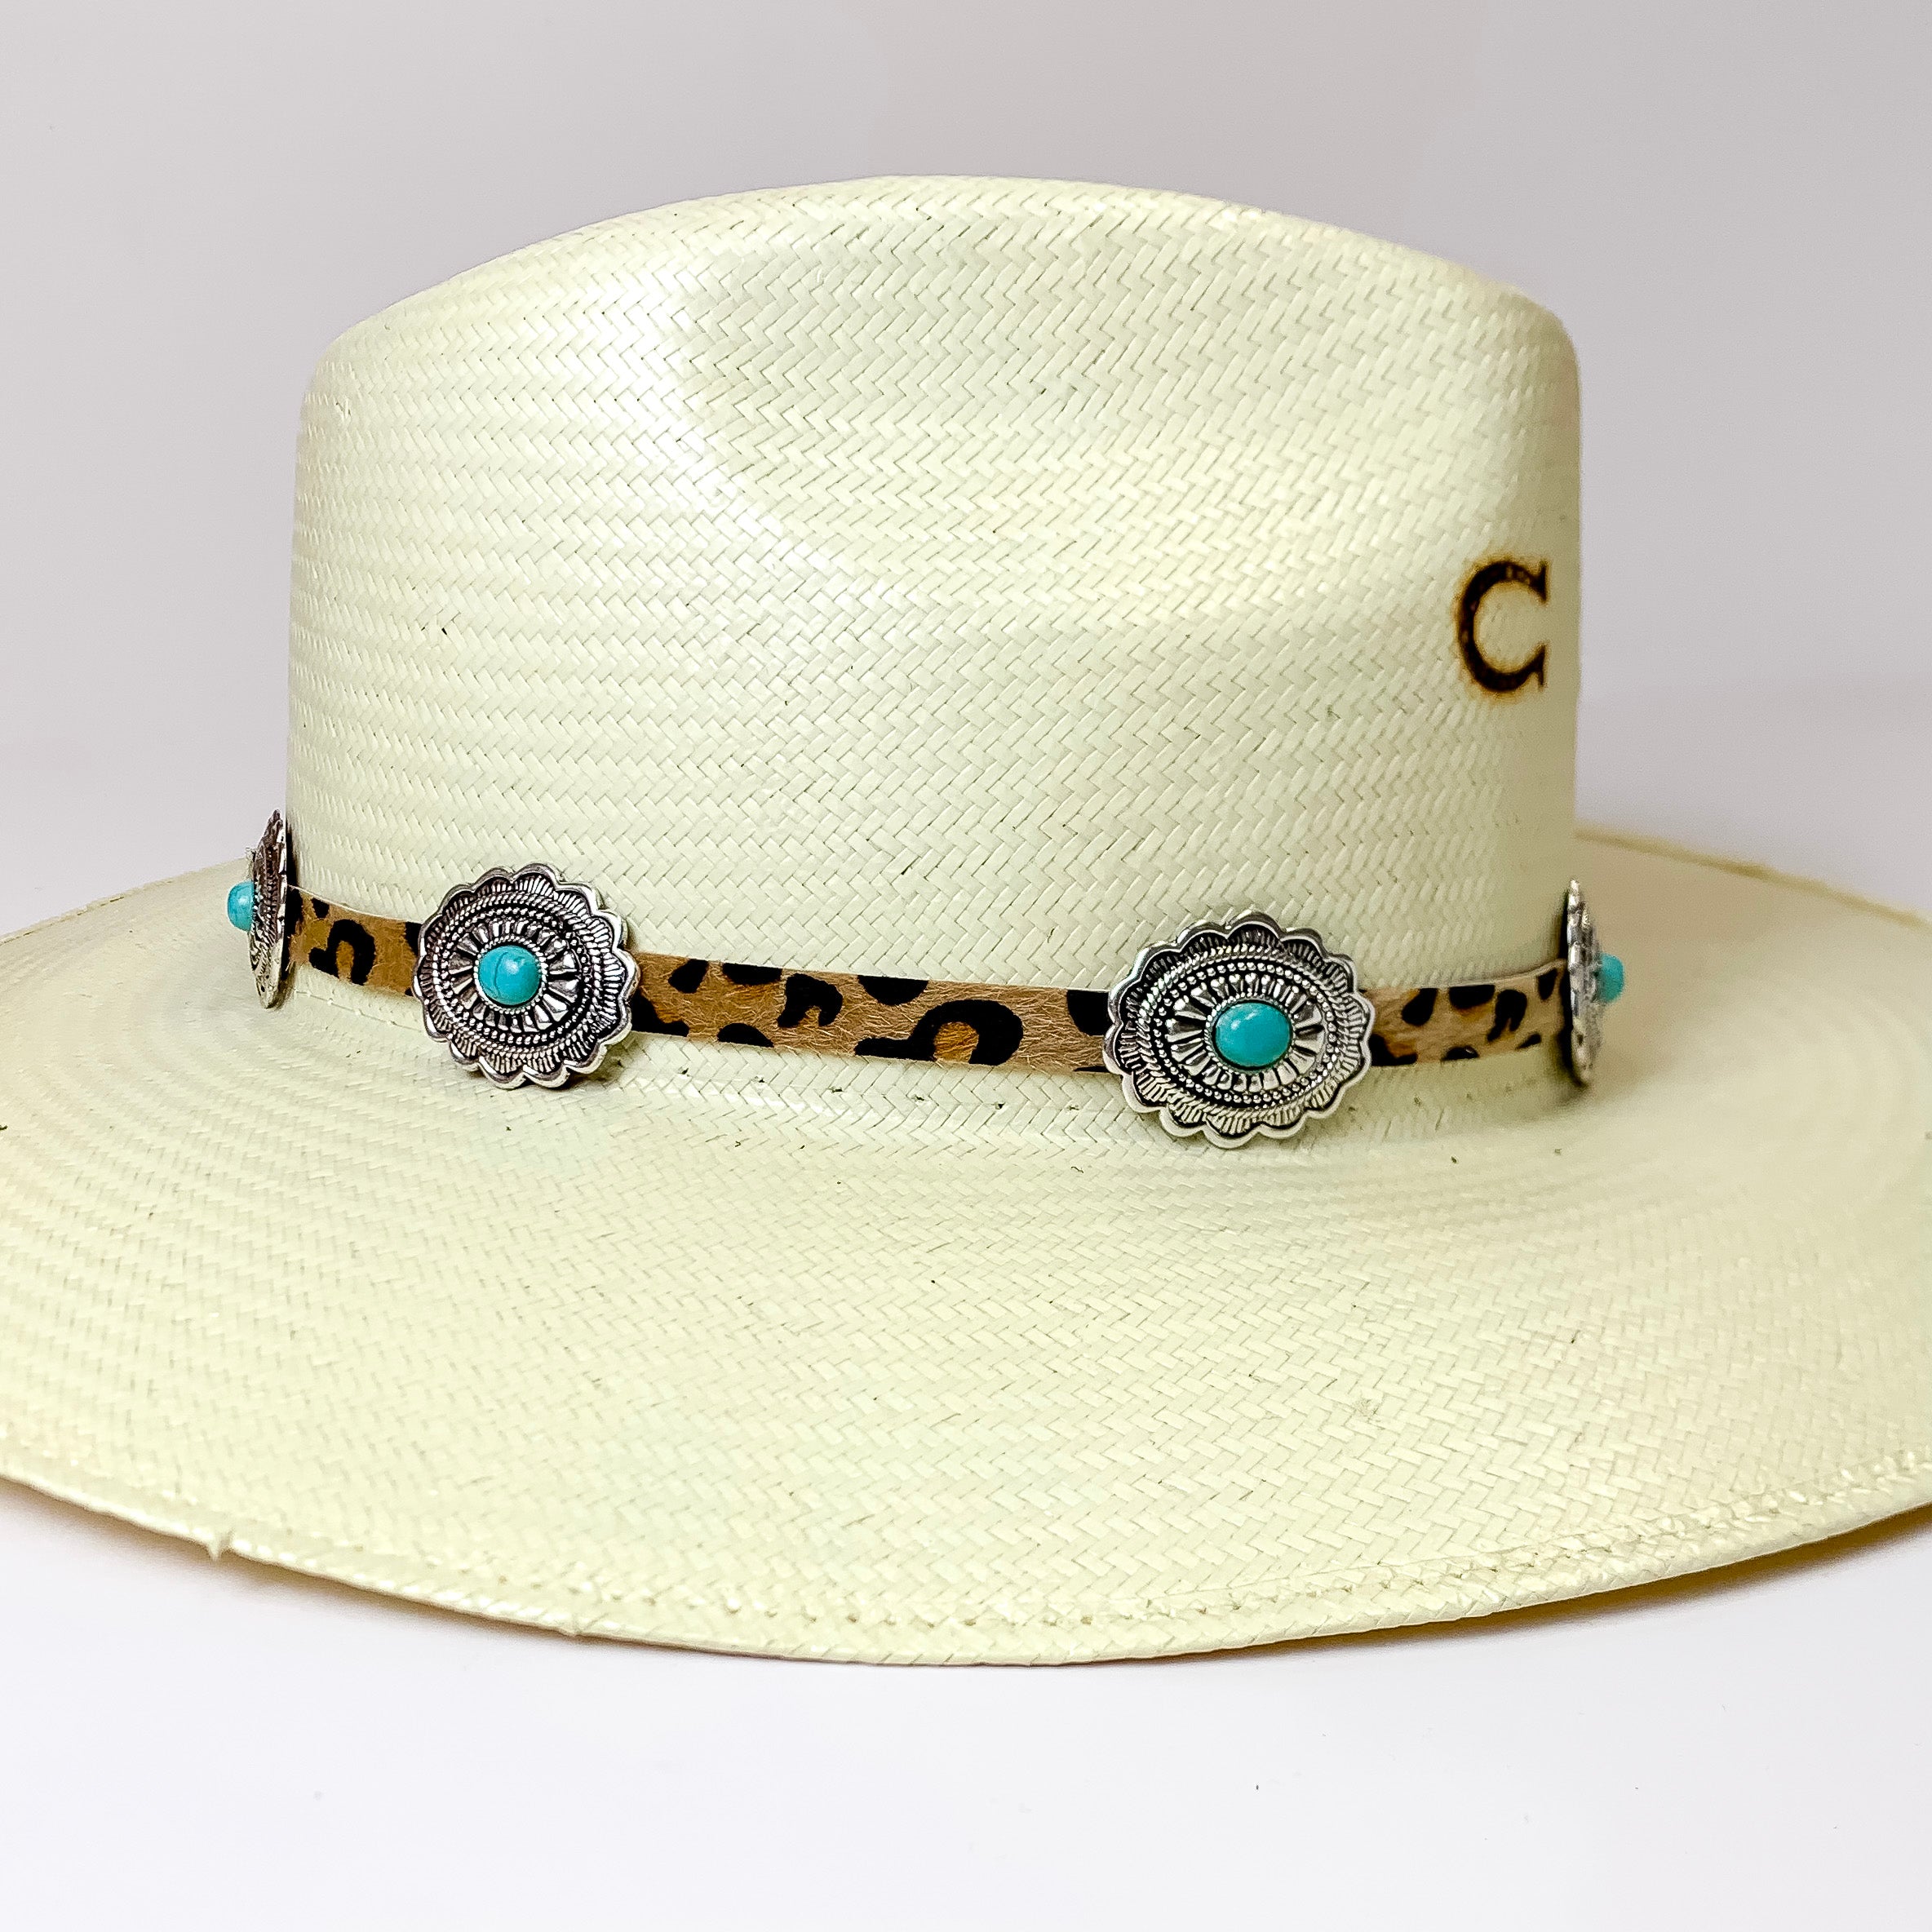 Leopard Print Hat Band with Silver Tone Conchos and Faux Turquoise Stones - Giddy Up Glamour Boutique